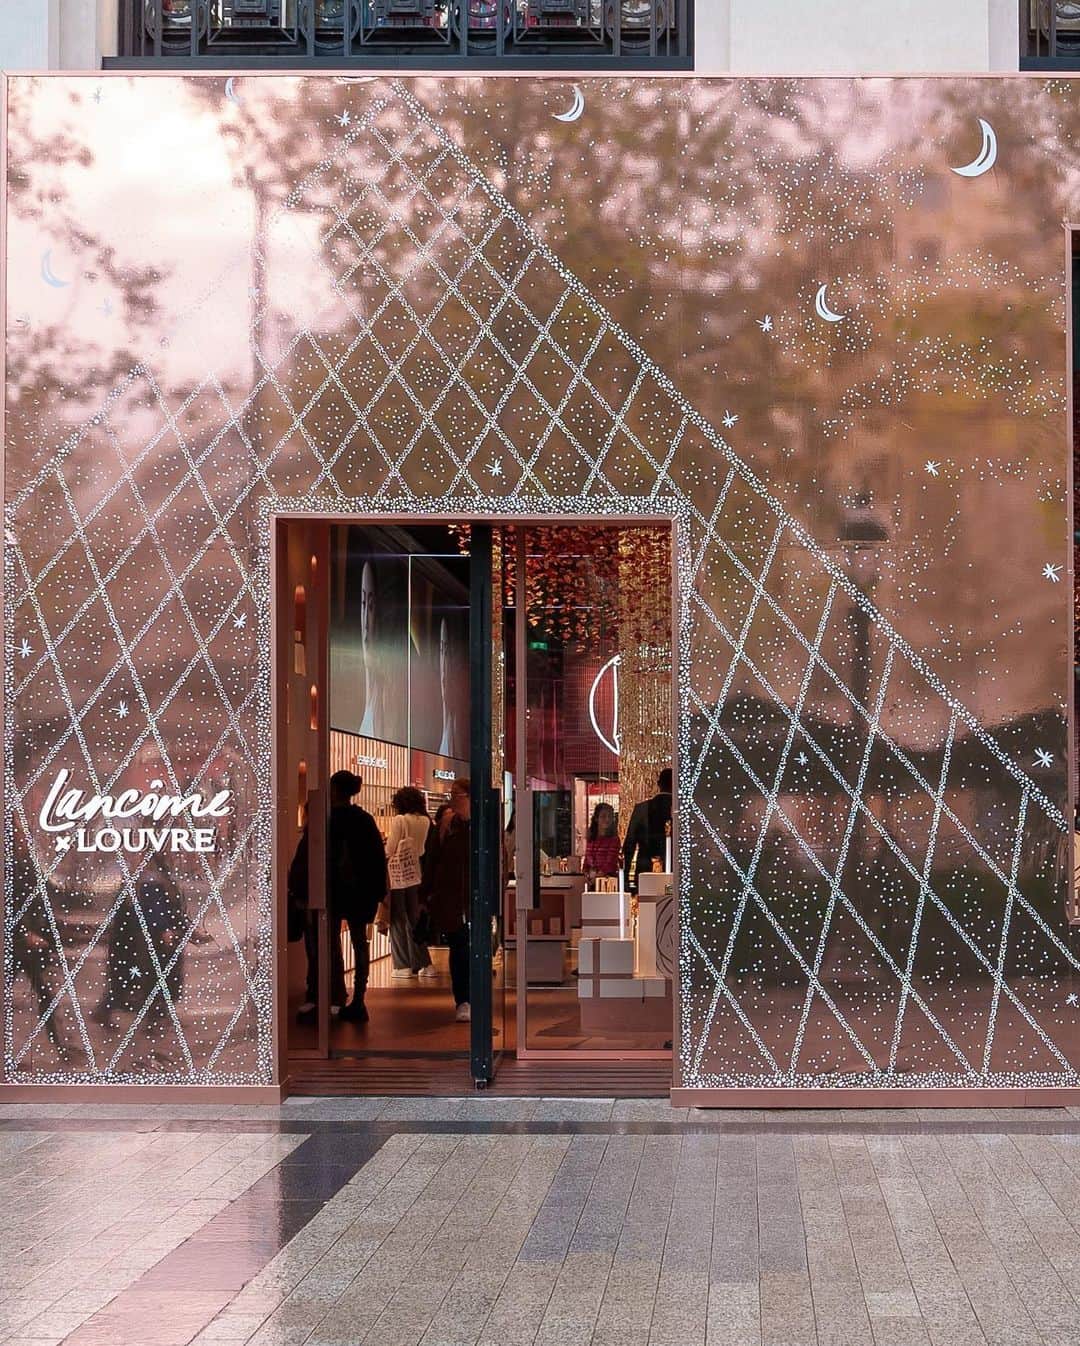 Lancôme Officialのインスタグラム：「The Louvre meets the Champs-Elysées at Lancôme’s Parisian flagship store. Inspired by the iconic pyramid, the flagship showcases the sparkling collaboration with @museelouvre. Step into an extraordinary Holiday world to celebrate the beauty of art in the heart of the city of lights.  #Lancome #LancomexLouvre #Lancome52Av #Holiday23 #BeautyIsALivingArt」